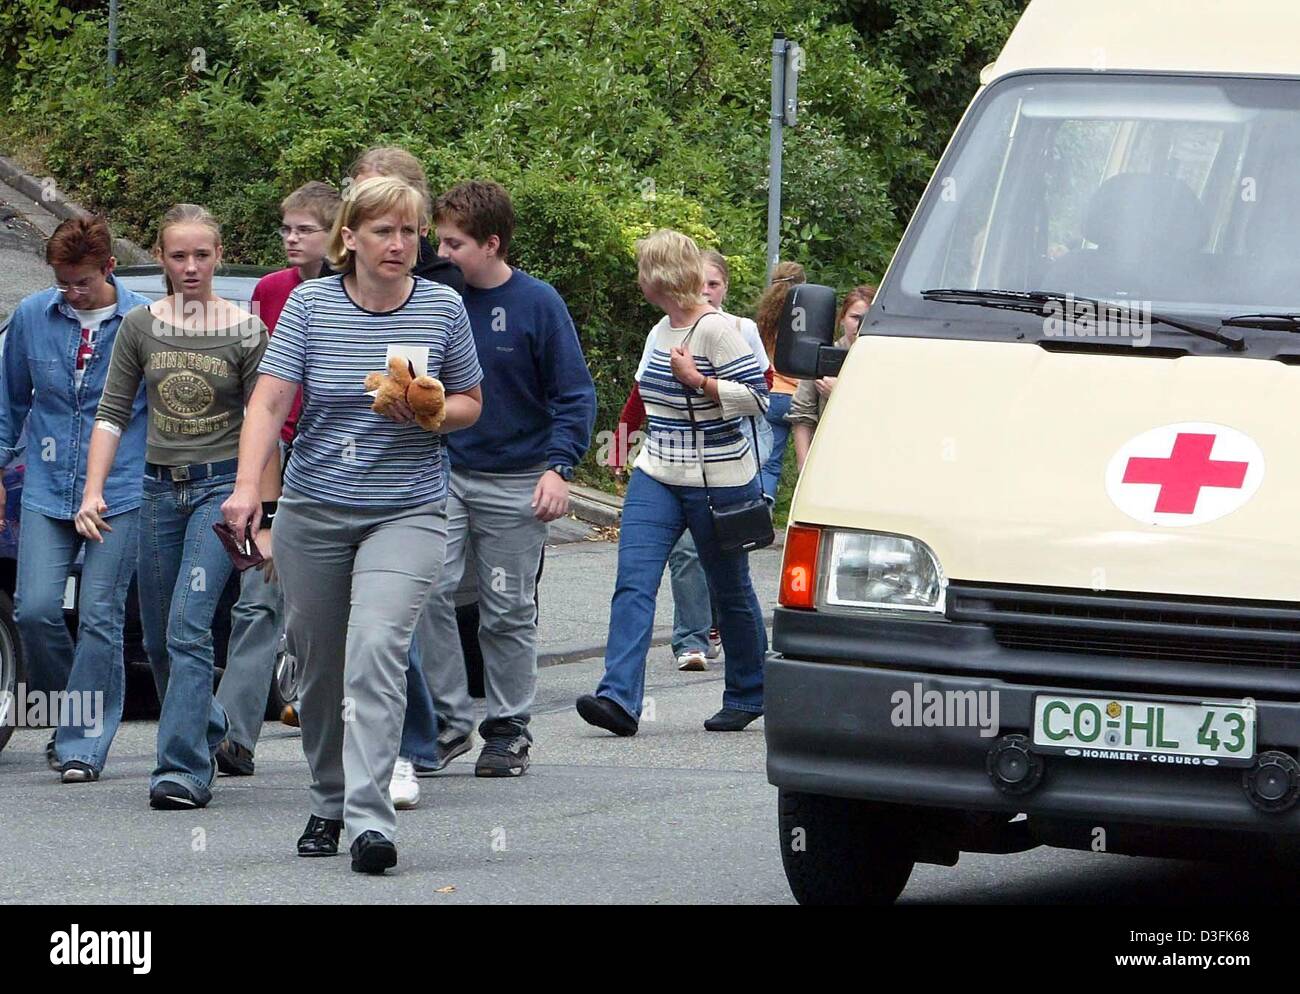 (dpa) - Students, teachers and parents walk along a street past an ambulance at a school in Coburg, Germany, 2 July 2003. According to the police a 16-year-old student was handling a gun in the classroom at school when a shot was triggered. The bullet went into the ceiling but when the teacher attempted to take the gun off the student she was shot in the thigh. The other students r Stock Photo